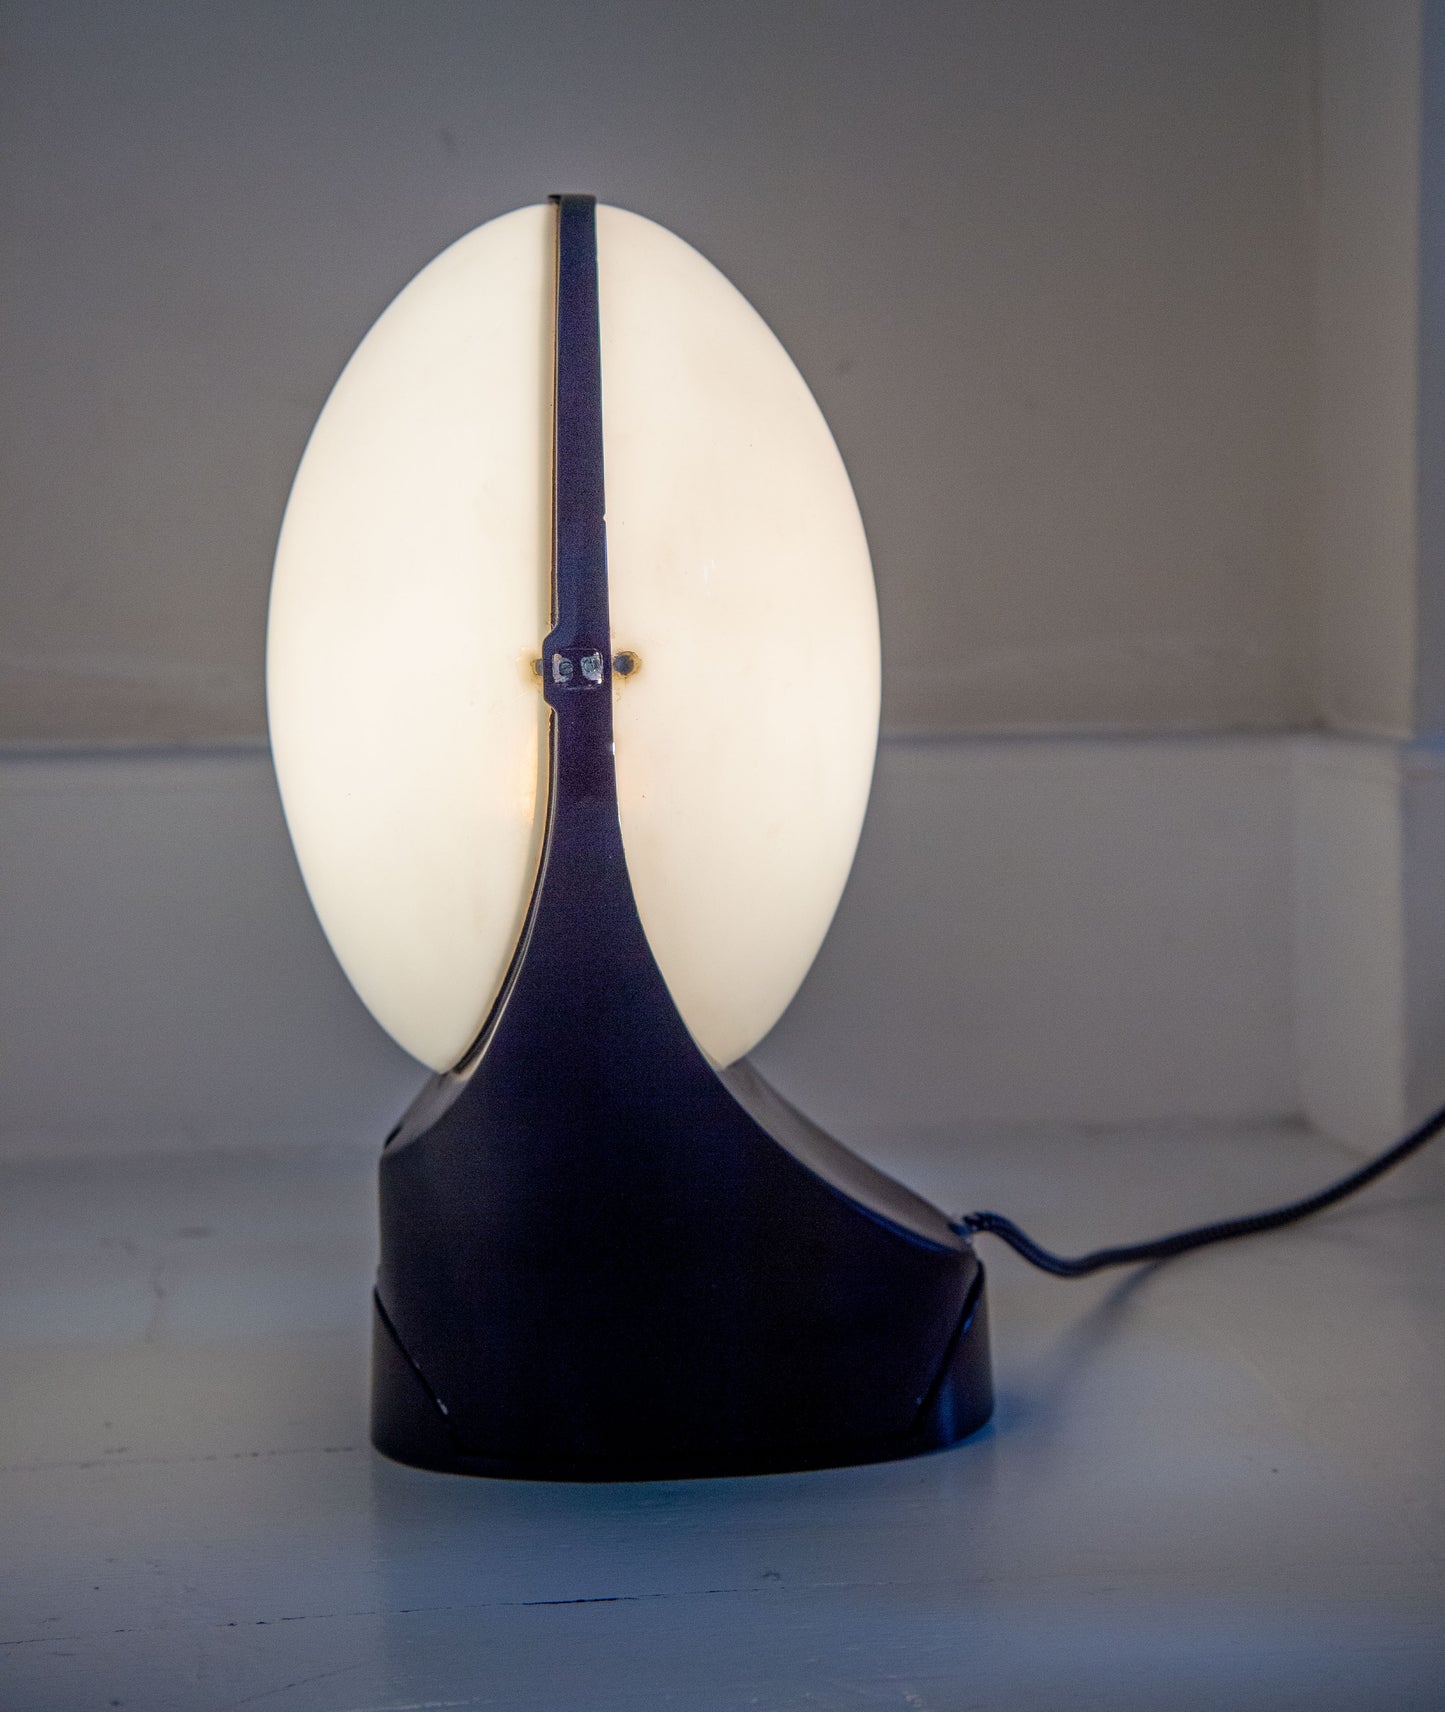 Unusual 1960’s Desk Lamp With Perspex Lenses And A Steel Frame And Base.